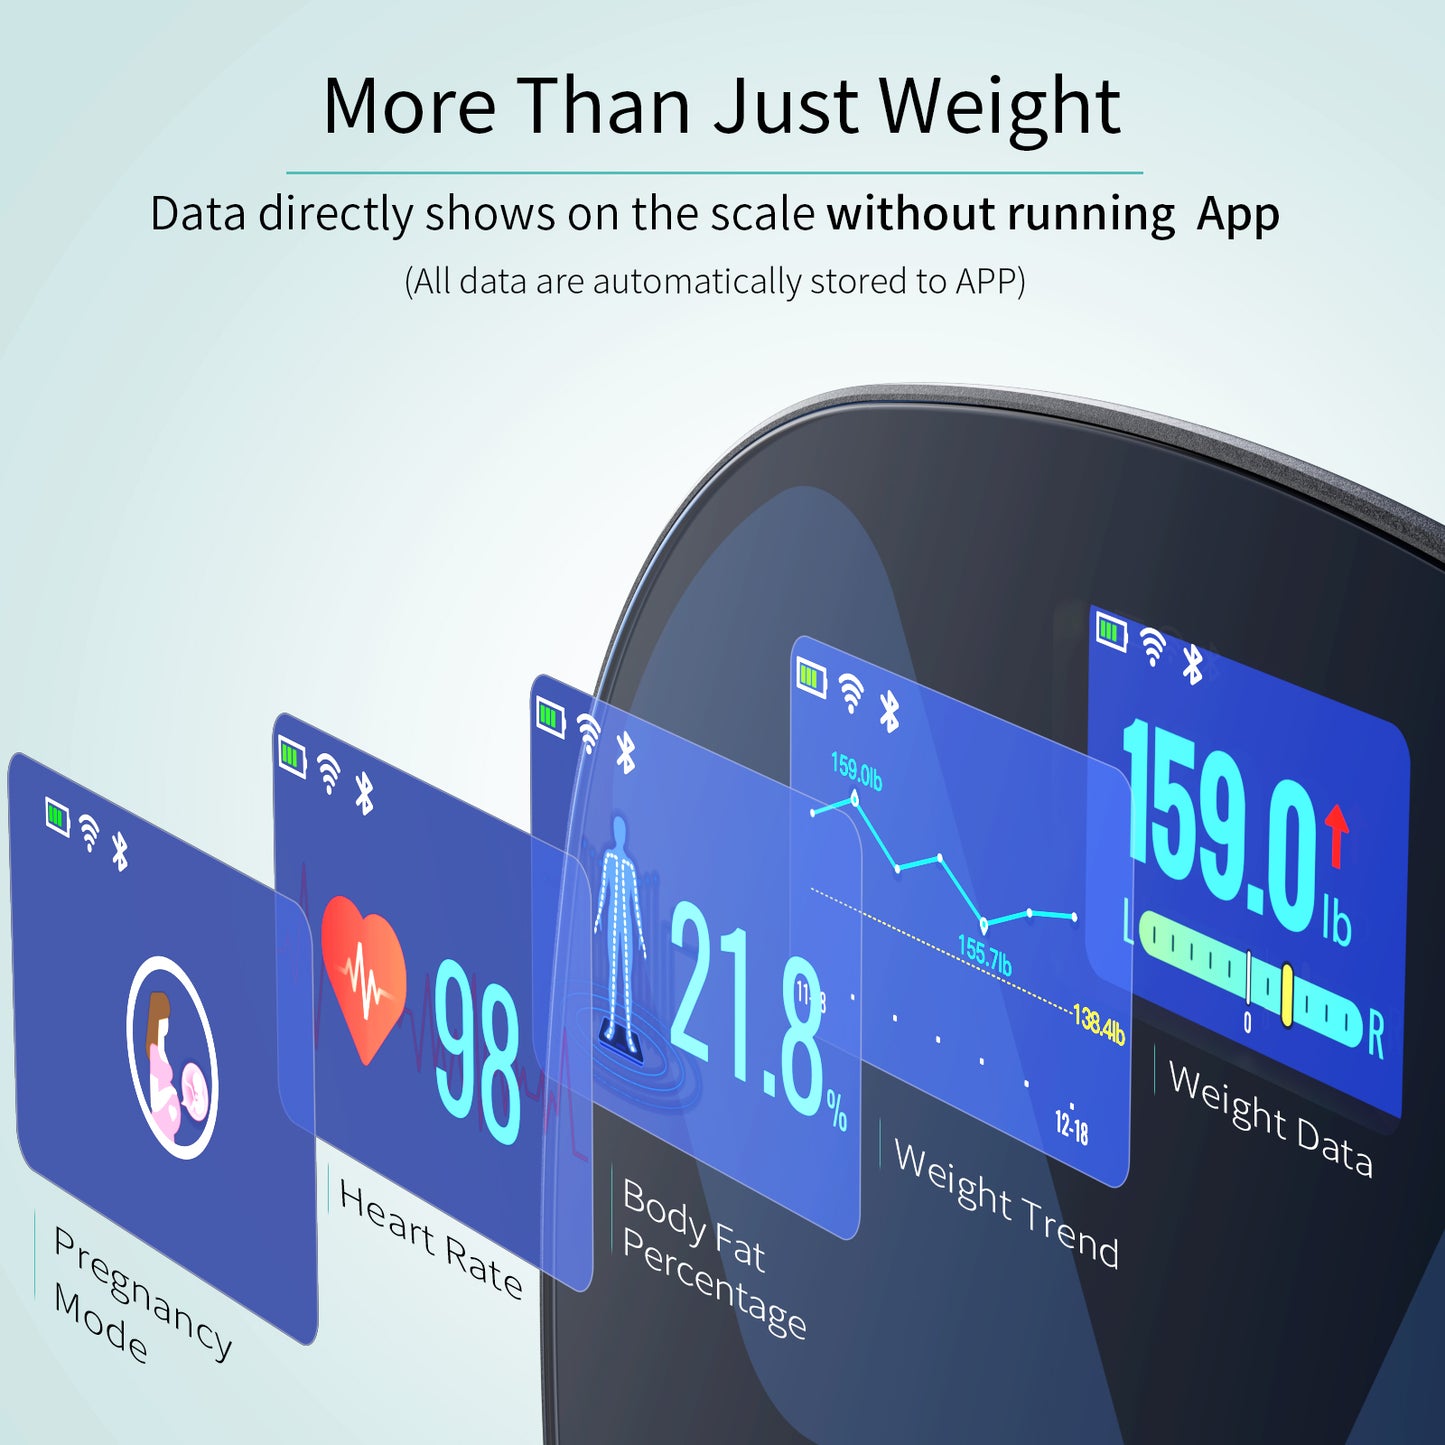 Slimpal Smart Scale with Body Fat and Water Weight, WiFi and Bluetooth, Rechargeable Digital Scale, Large Display for Heart Rate, Weight Trend